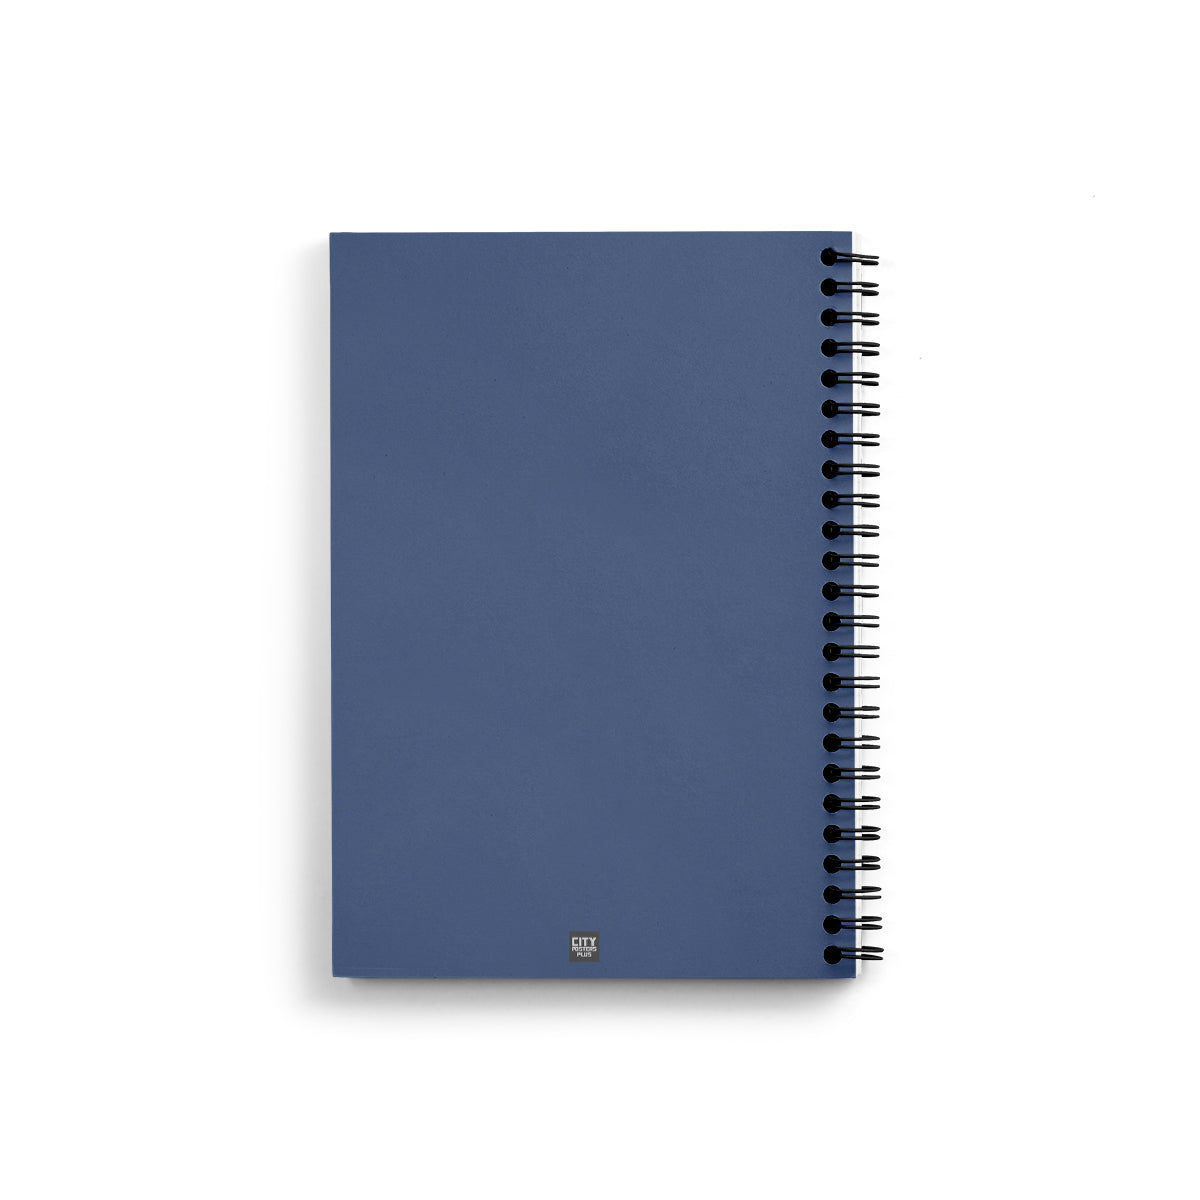 50 Number Notebook (Navy Blue, A5 Size, 100 Pages, Ruled, 4 Pack)